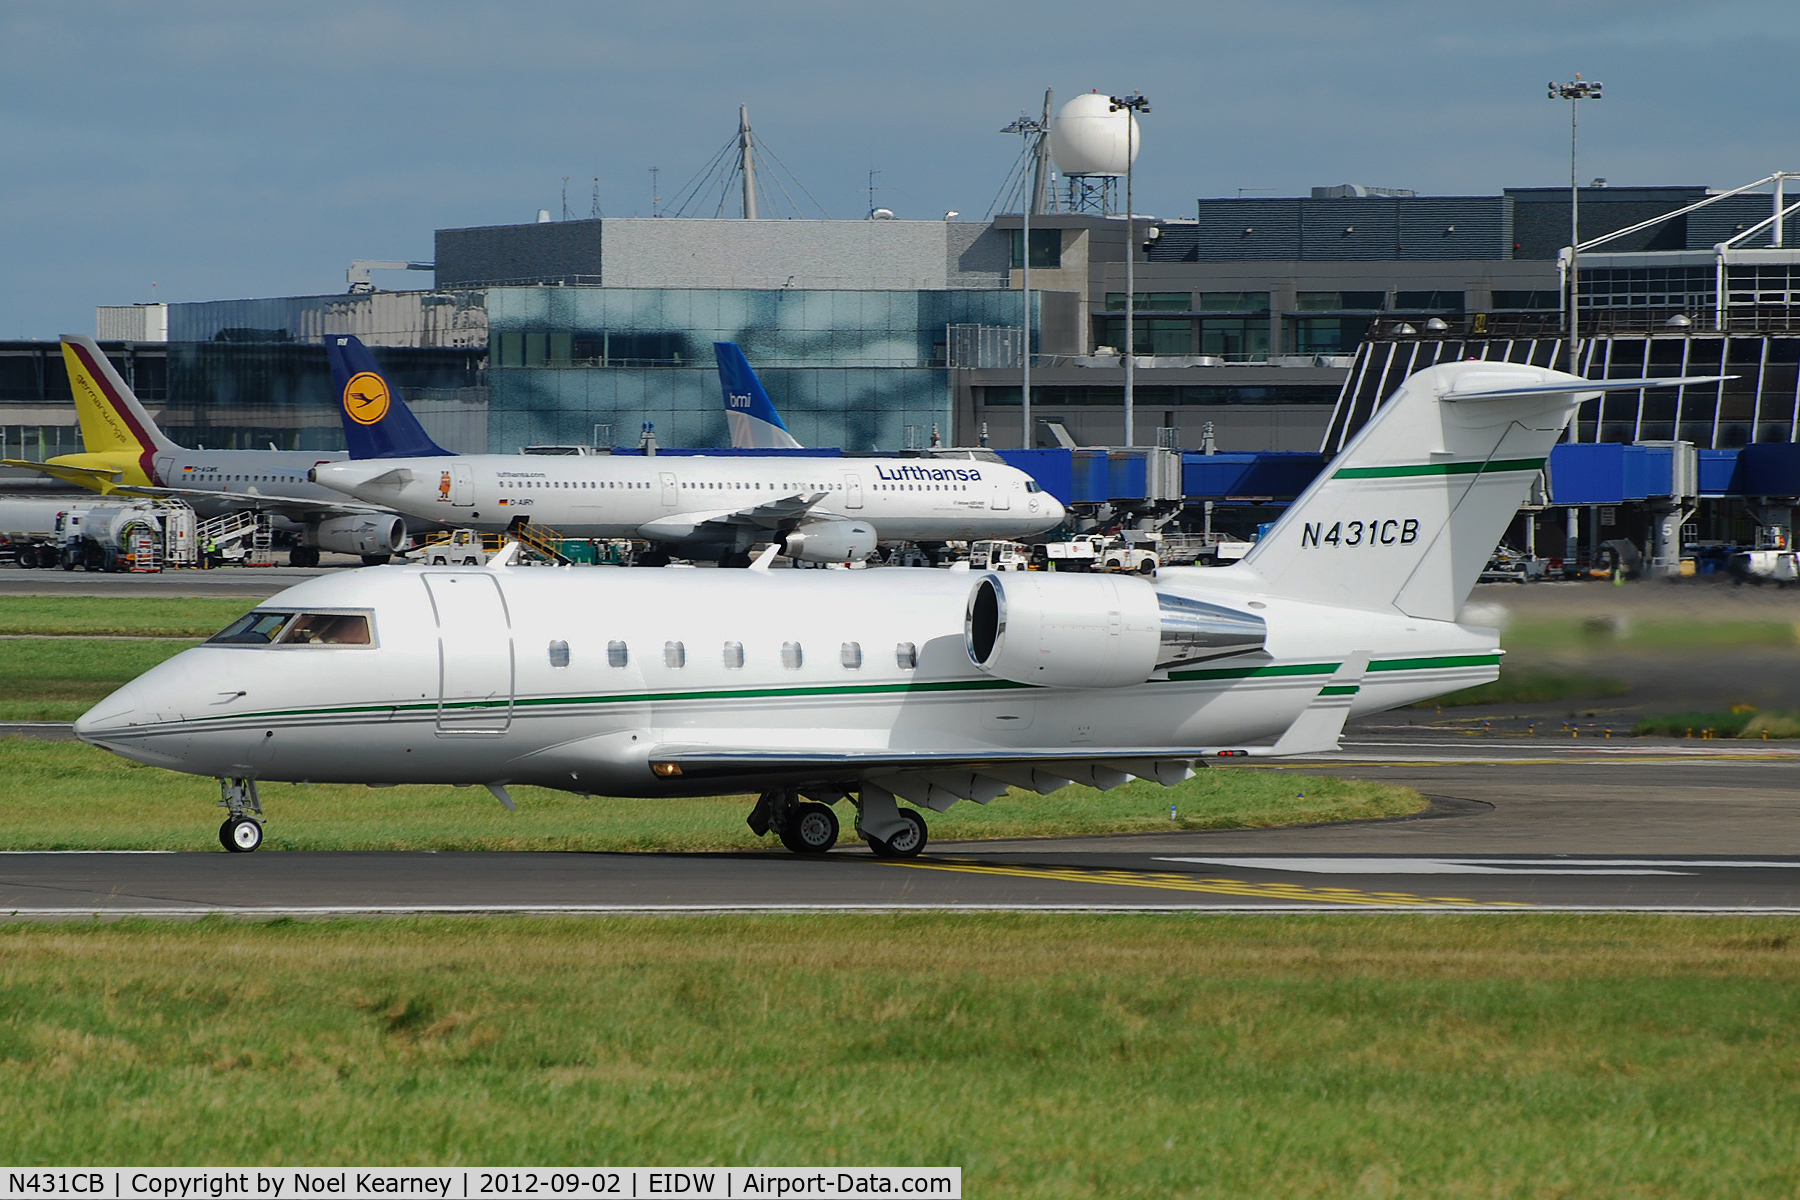 N431CB, 1994 Canadair Challenger 601-3R (CL-600-2B16) C/N 5164, Lined up for departure off Rwy 28 at EIDW.